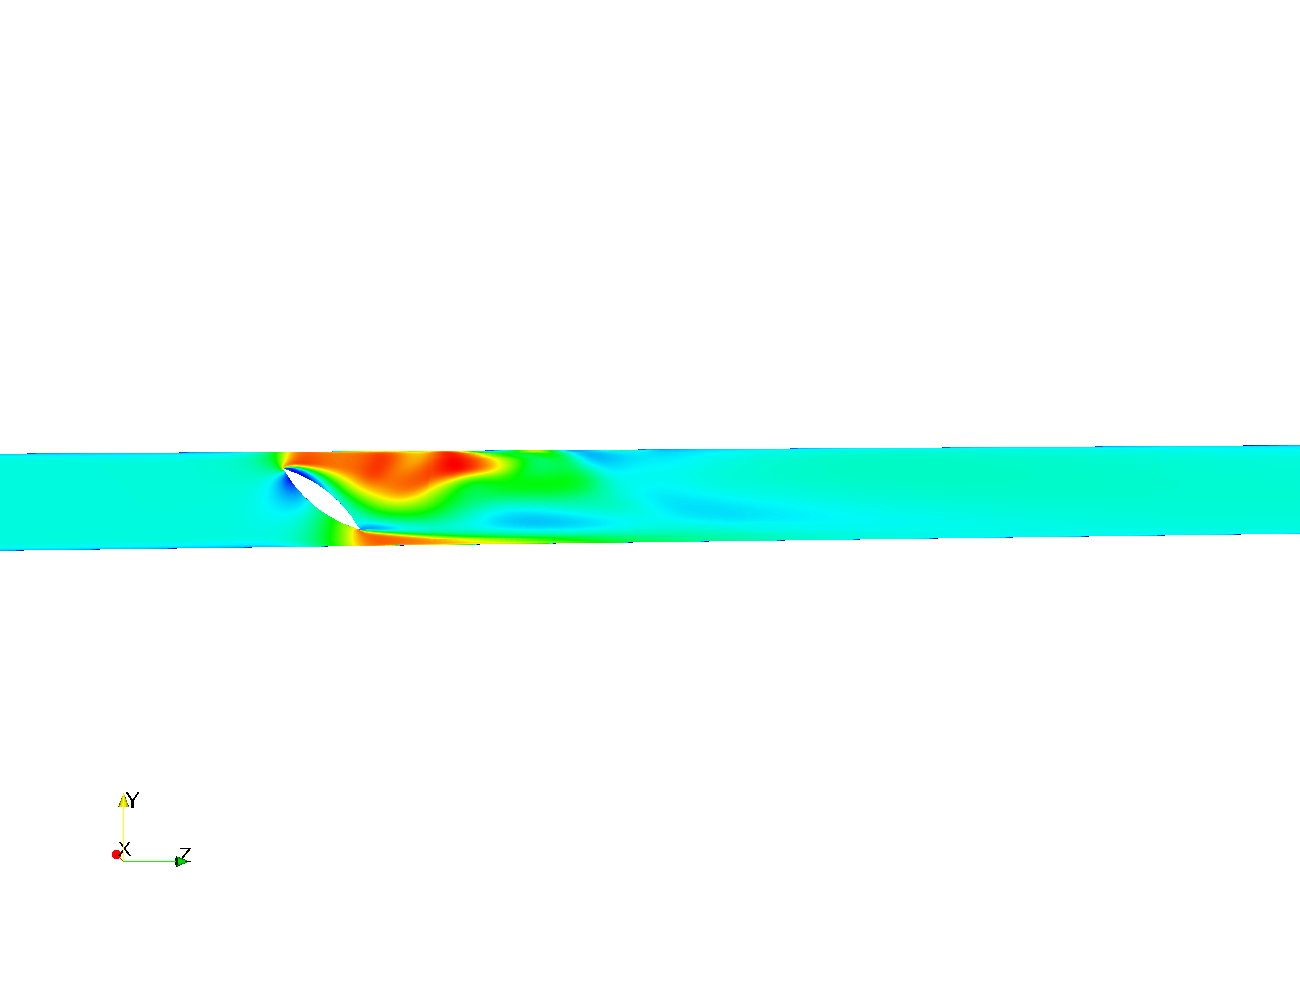 Butterfly Valve Flow CFD Simulation - Copy image